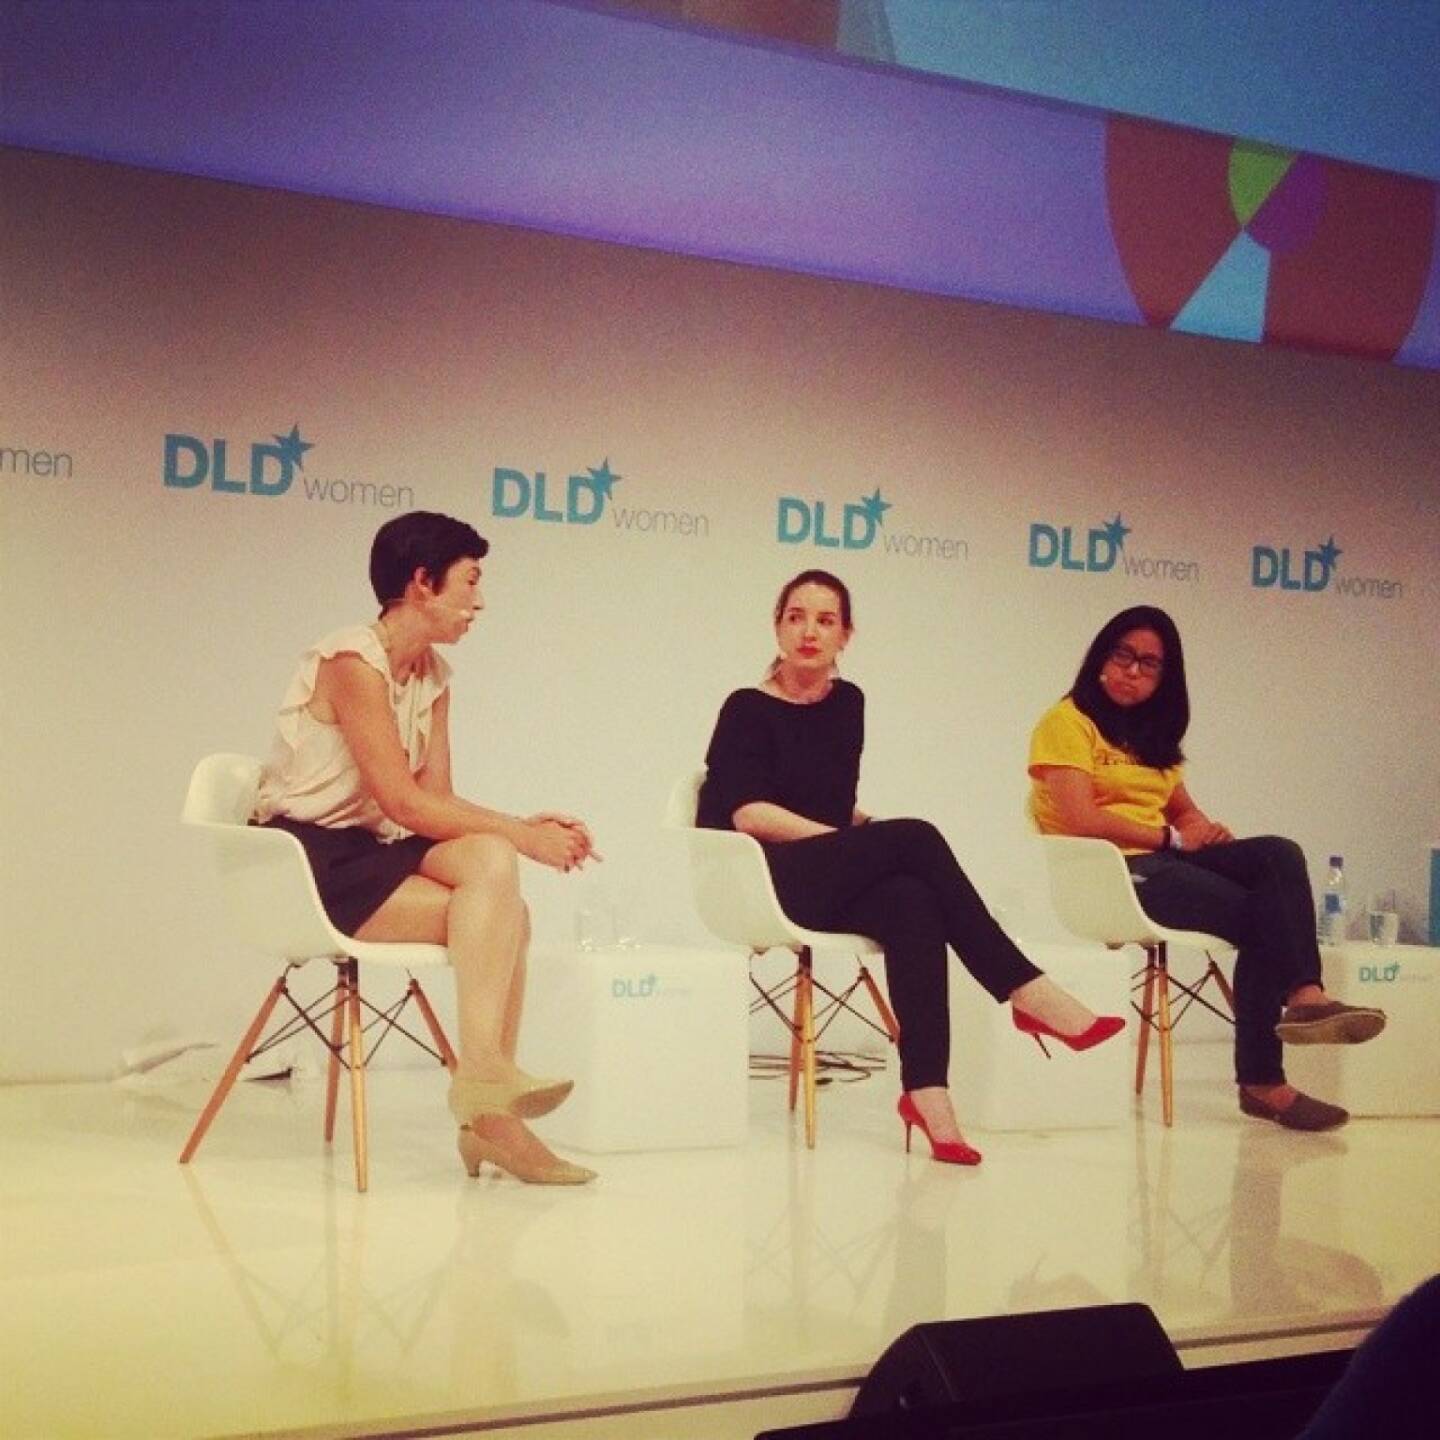 At #dldw14 in Munich, learning about the future of work for women in digital professions